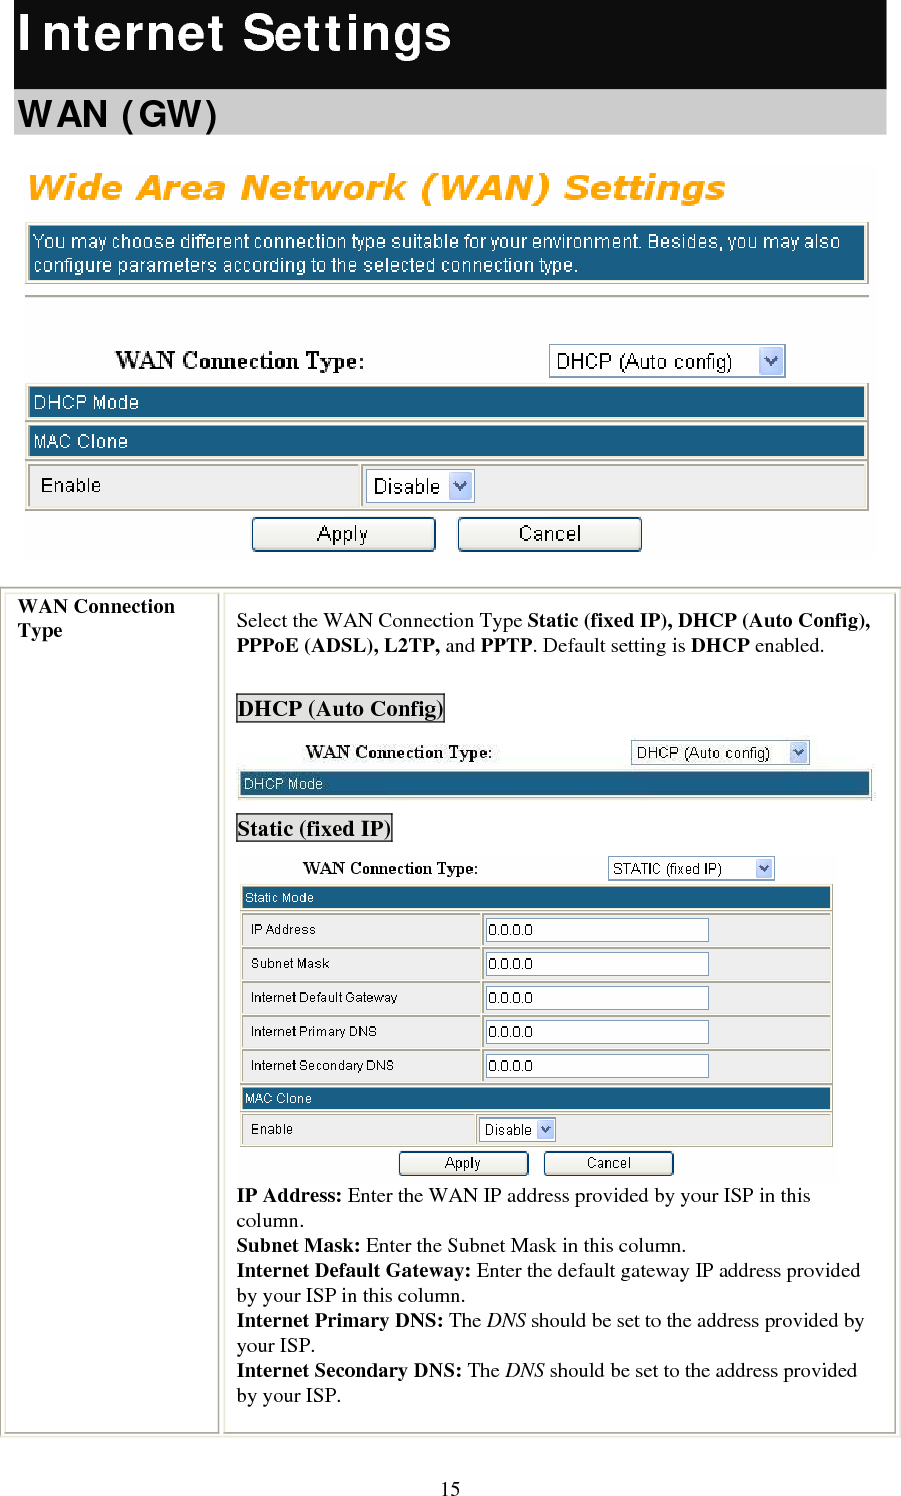   15Internet Settings  WAN (GW)  WAN Connection Type  Select the WAN Connection Type Static (fixed IP), DHCP (Auto Config), PPPoE (ADSL), L2TP, and PPTP. Default setting is DHCP enabled.  DHCP (Auto Config) Static (fixed IP)  IP Address: Enter the WAN IP address provided by your ISP in this column. Subnet Mask: Enter the Subnet Mask in this column. Internet Default Gateway: Enter the default gateway IP address provided by your ISP in this column. Internet Primary DNS: The DNS should be set to the address provided by your ISP. Internet Secondary DNS: The DNS should be set to the address provided by your ISP.  